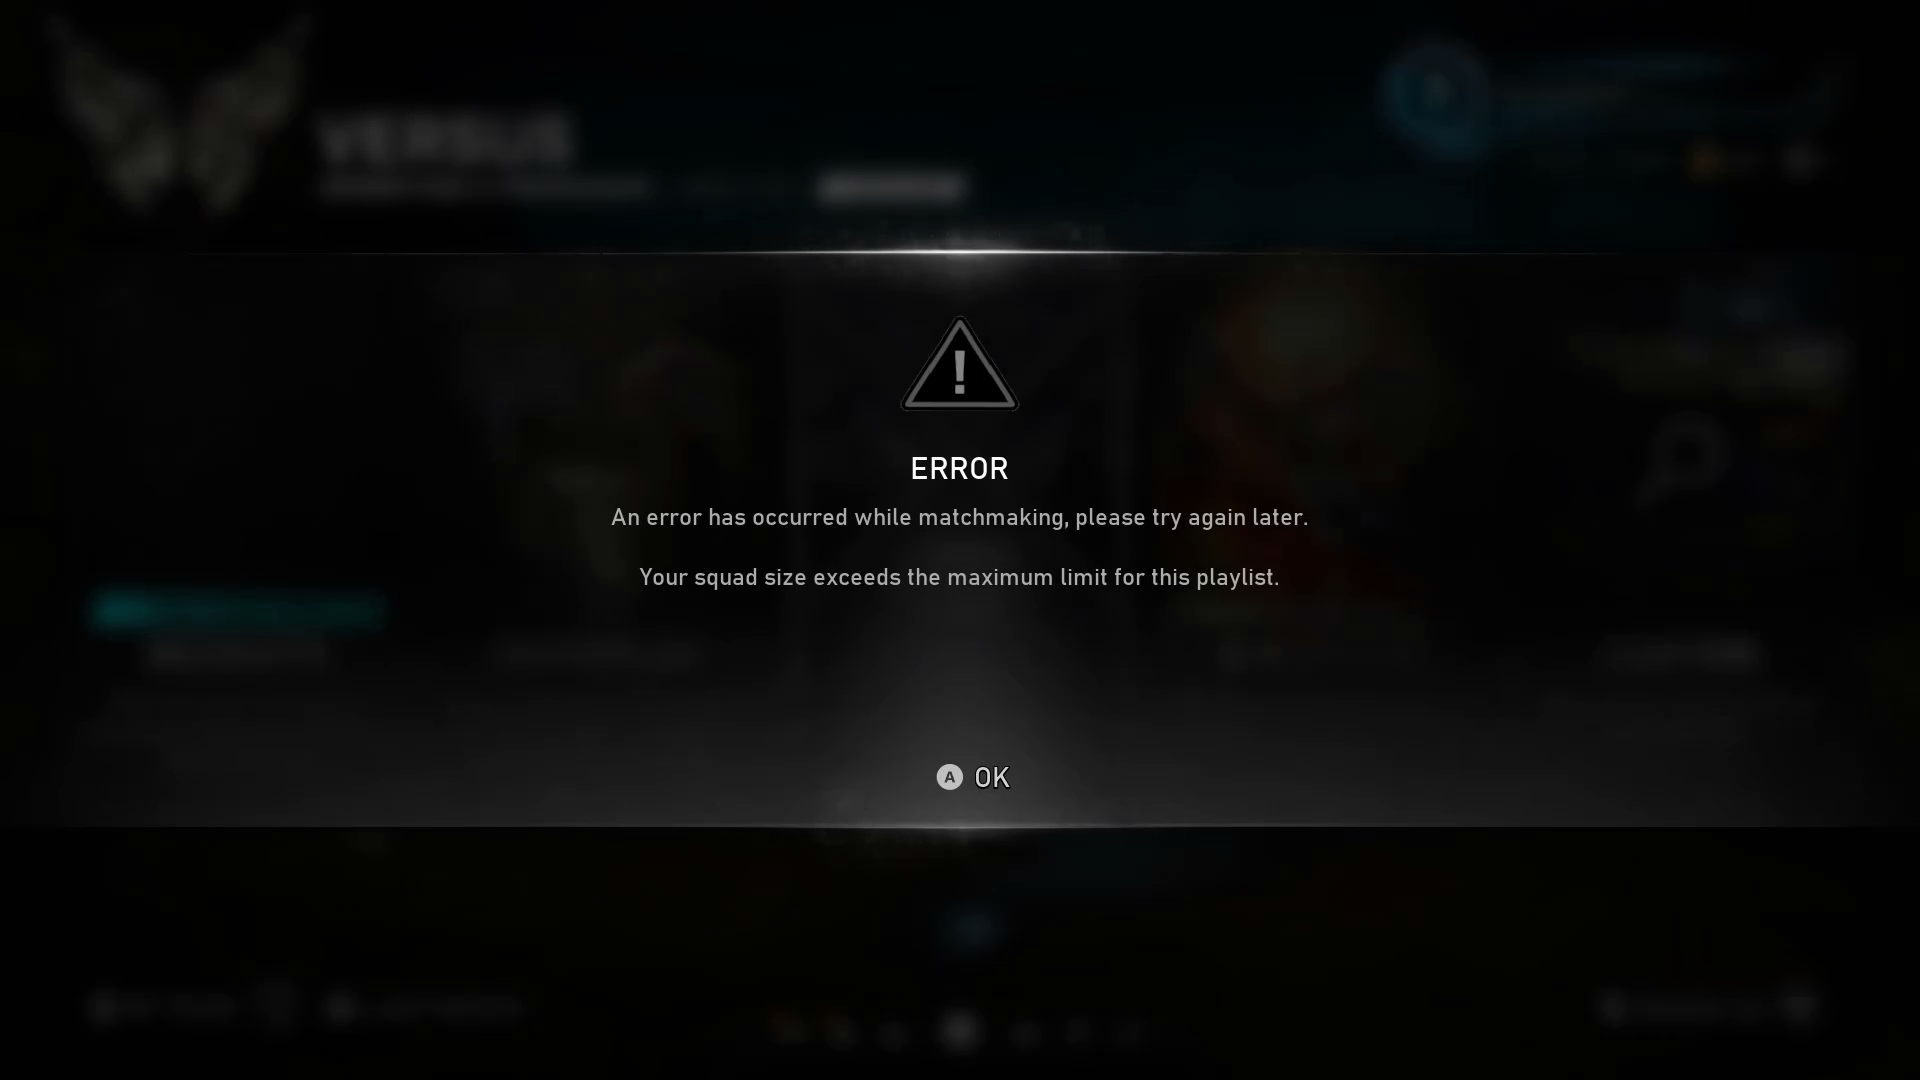 A screenshot of an error notification in Gears 5. The error notification reads "ERROR. An error has occurred while matchmaking, please try again later. Your squad size exceeds the maximum limit for this playlist."